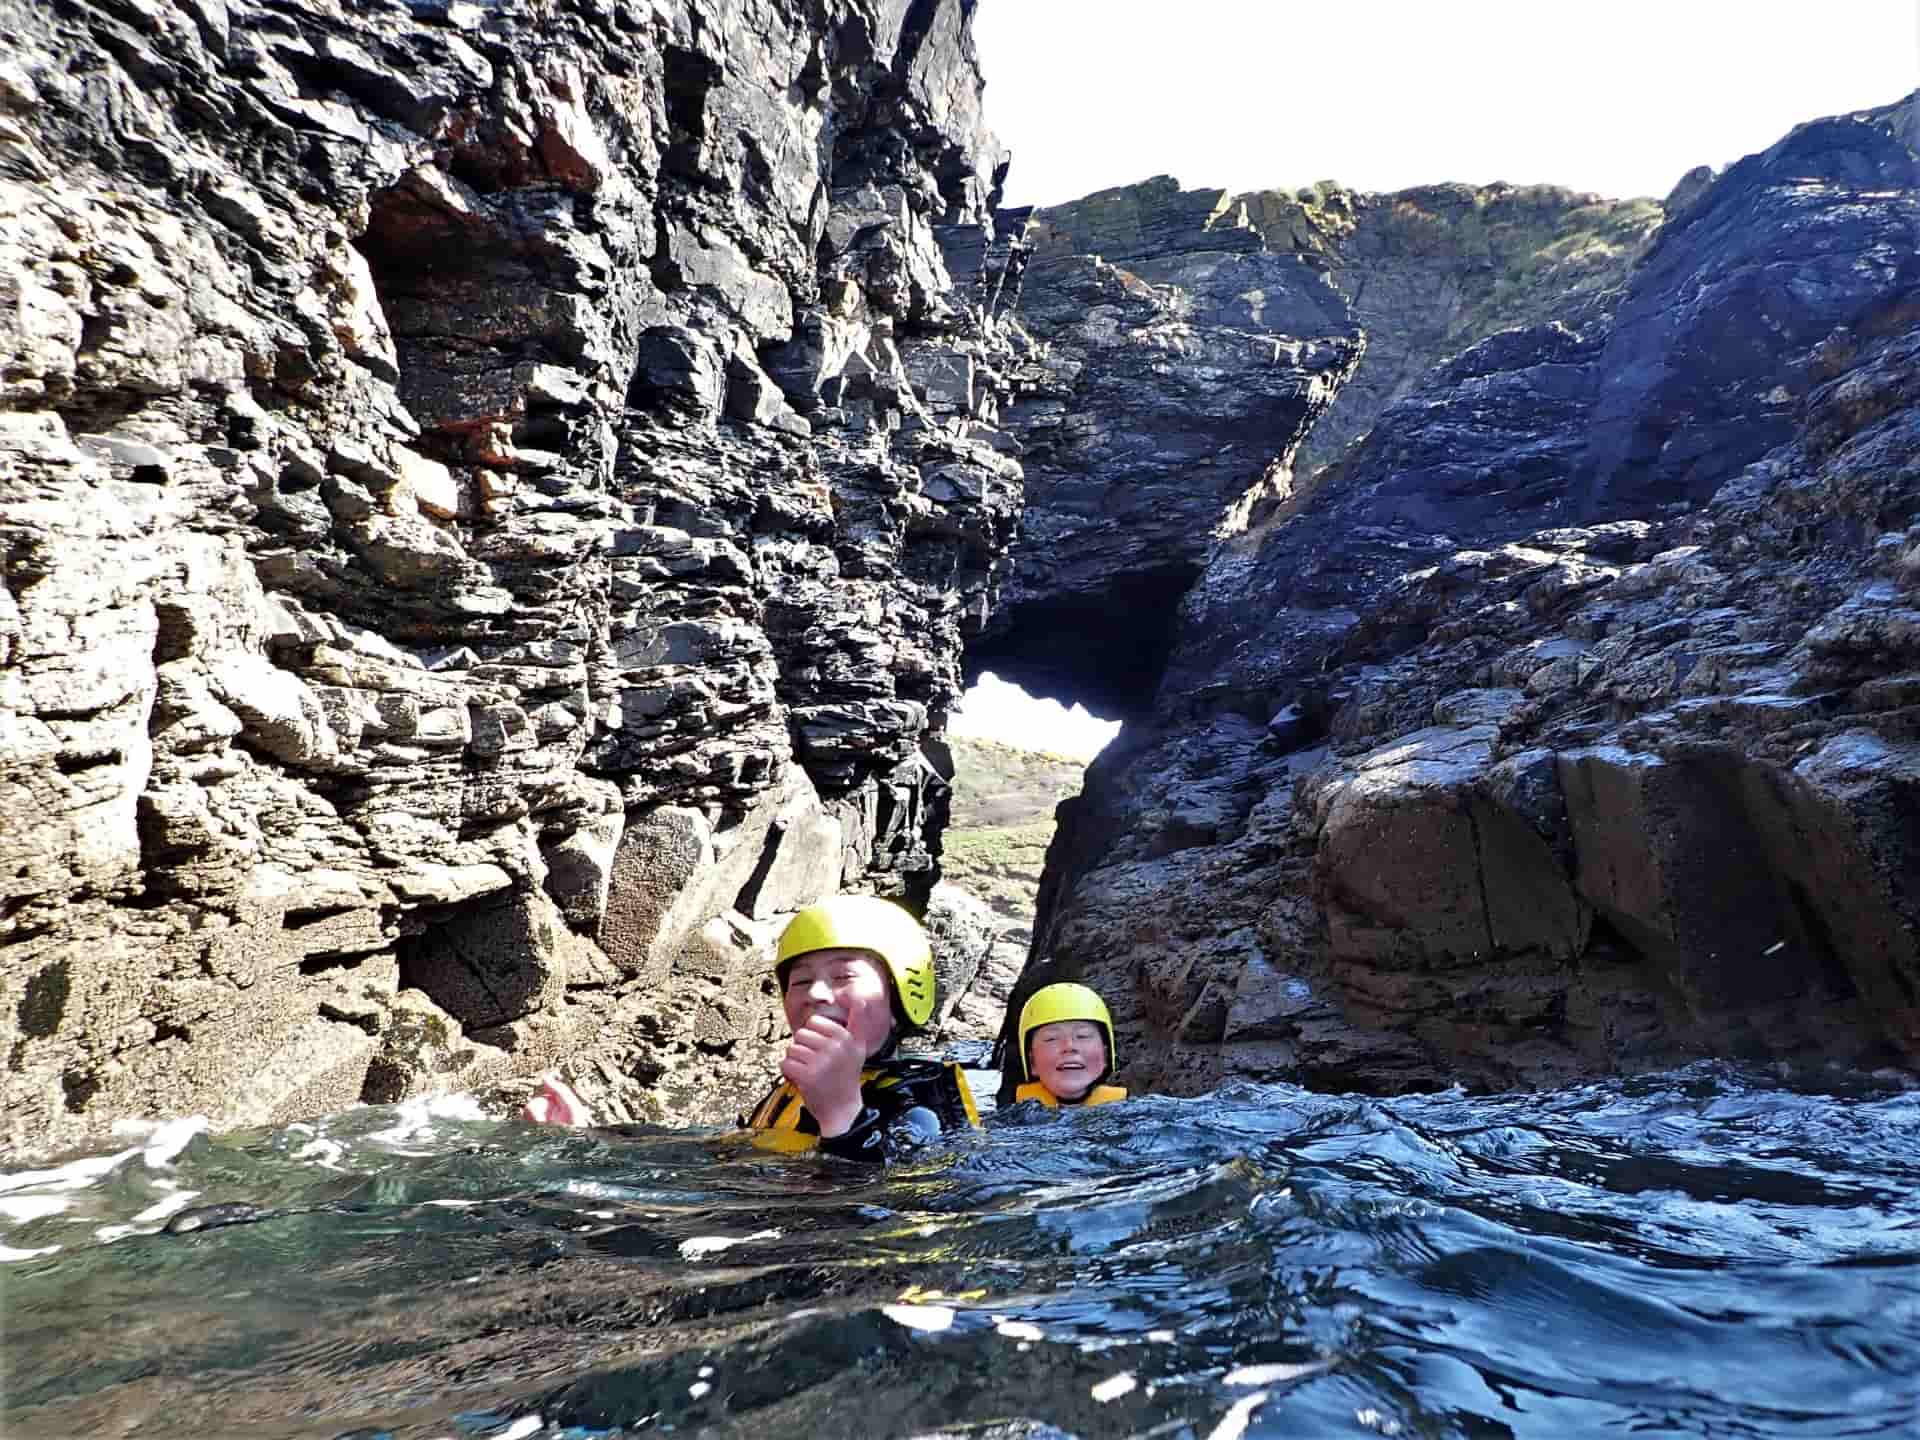 Coasteering group going through an impressive sea arch at Praa Sands, Cornwall